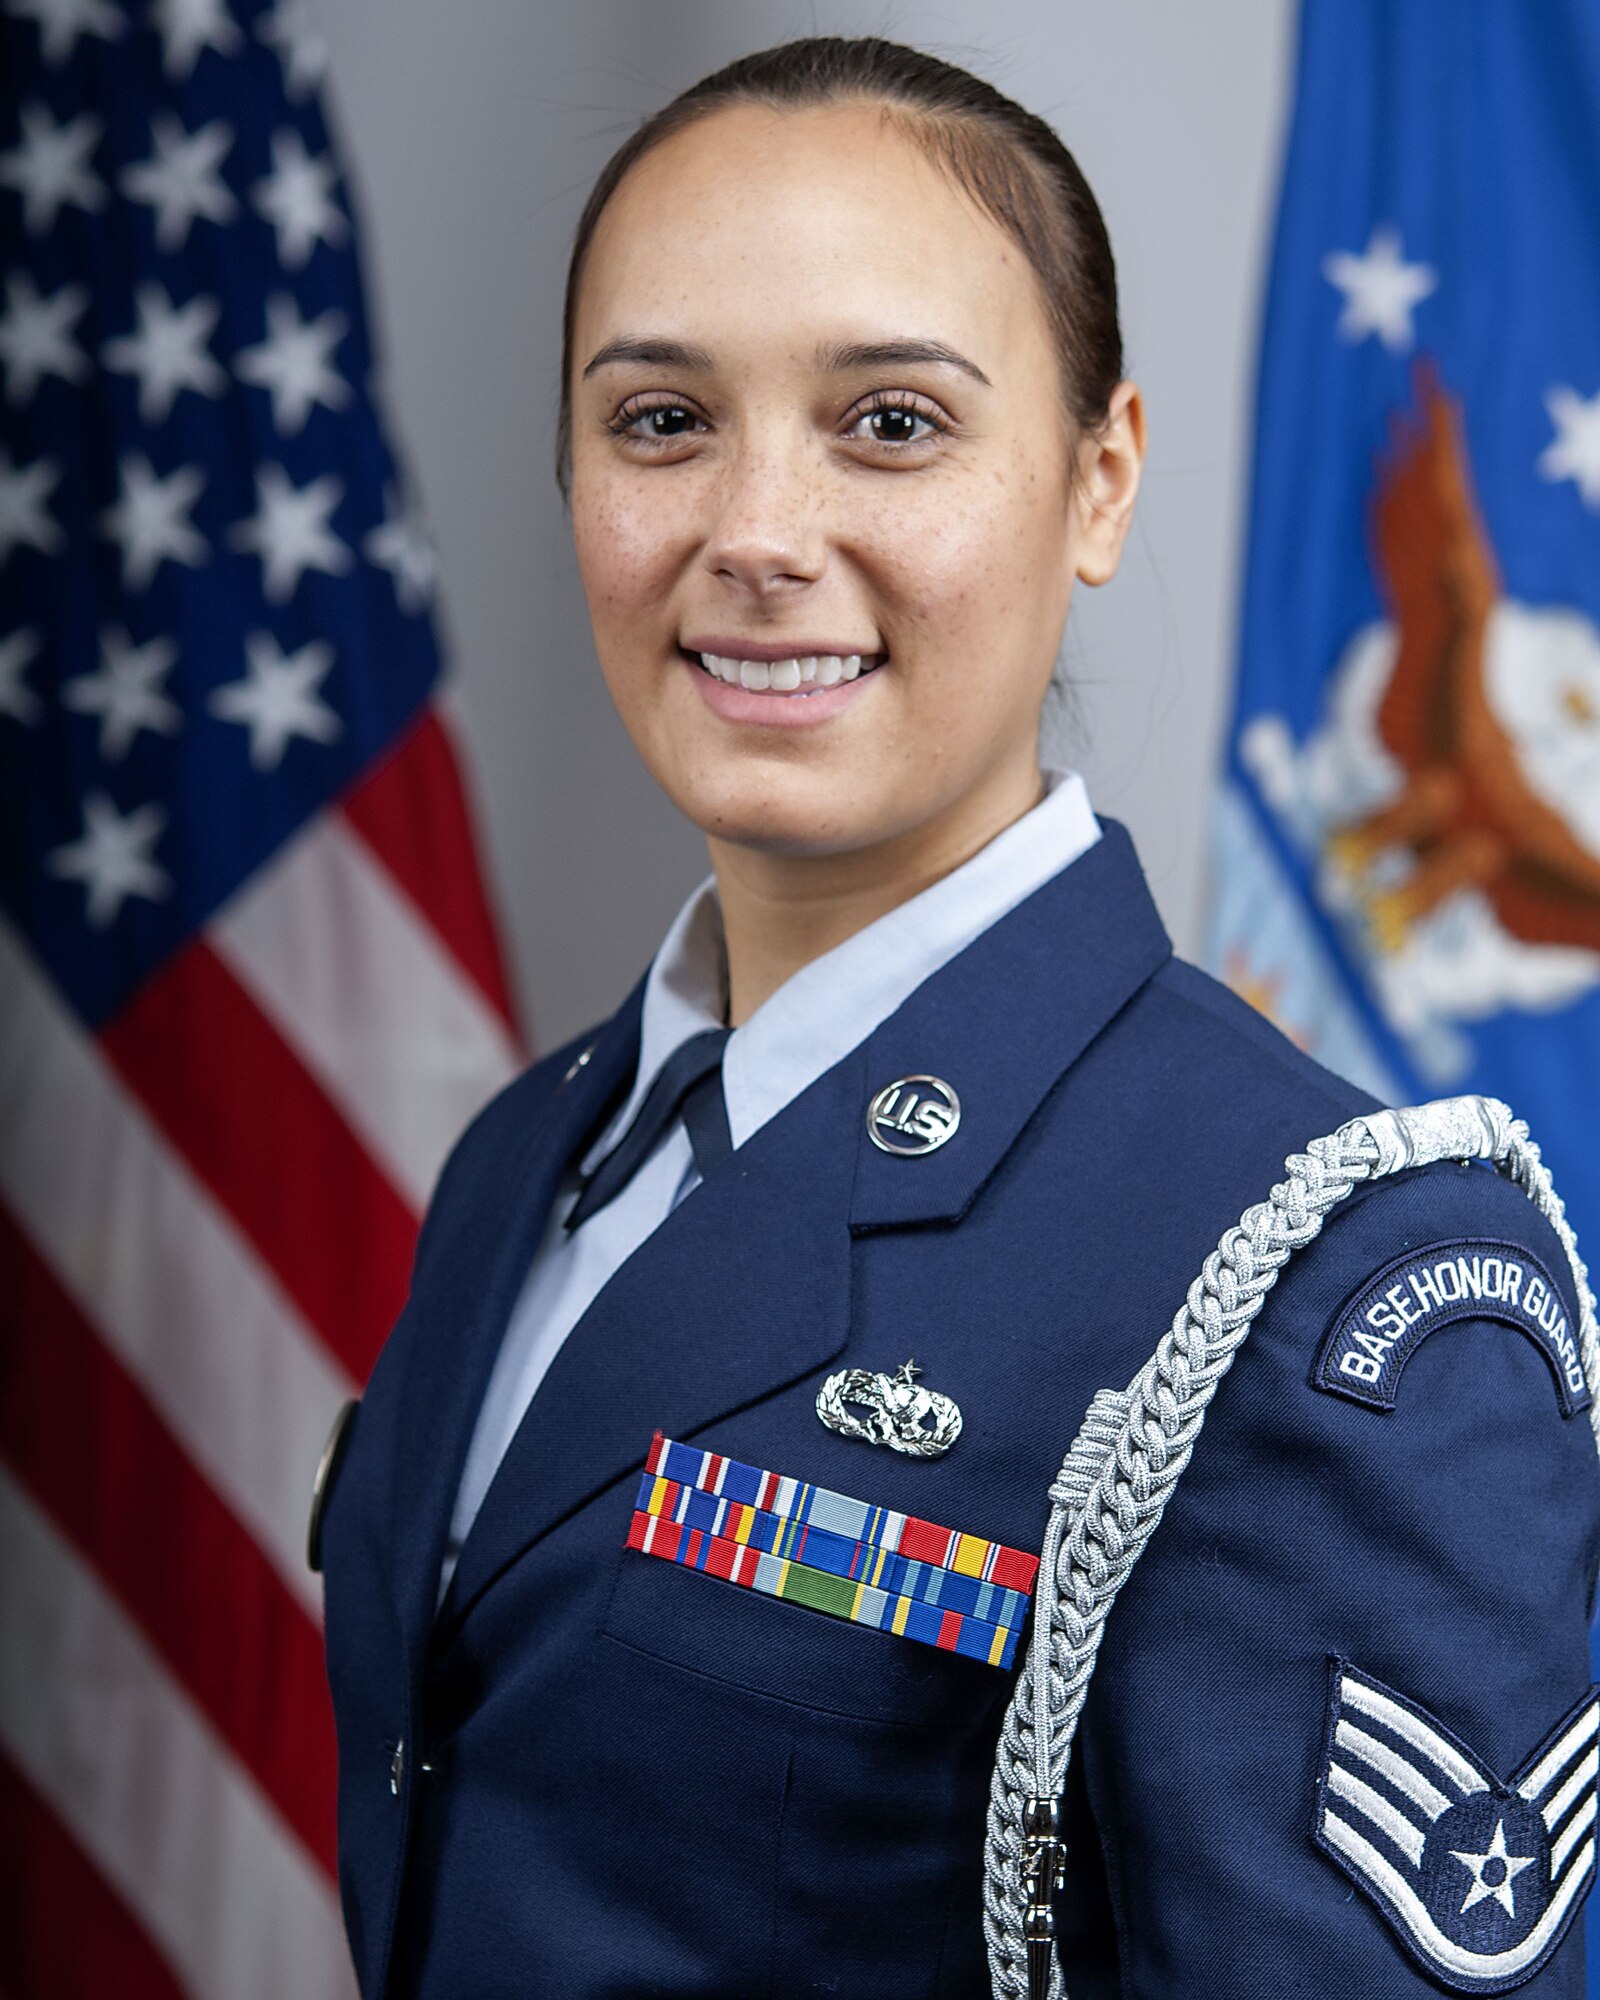 Staff Sgt. Janette Arnold poses for an official portrait at Grissom Air Reserve Base, Ind., January 10, 2017. Arnold was appointed as Grissom's Honor Guard program manager after having been with the program for three years. (U.S. Air Force photo / Douglas Hayes)